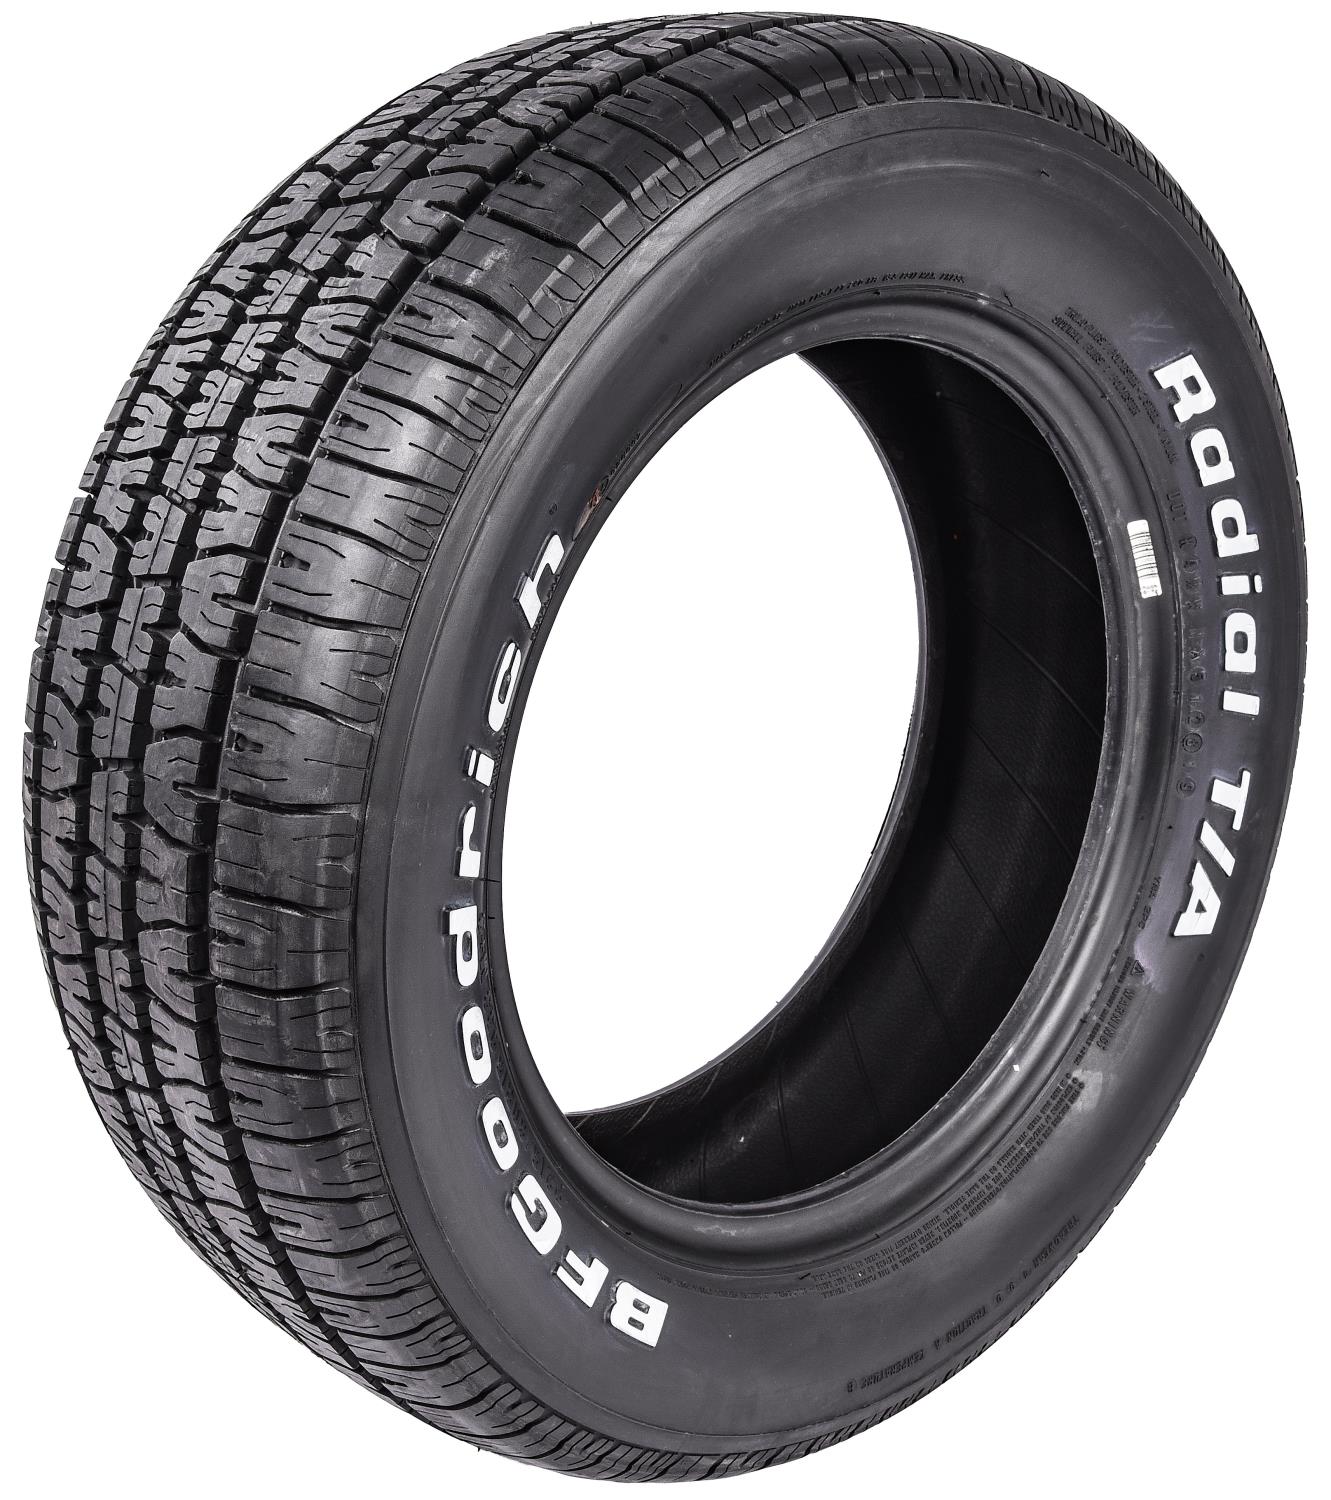 Radial T/A Tire P215/60R15